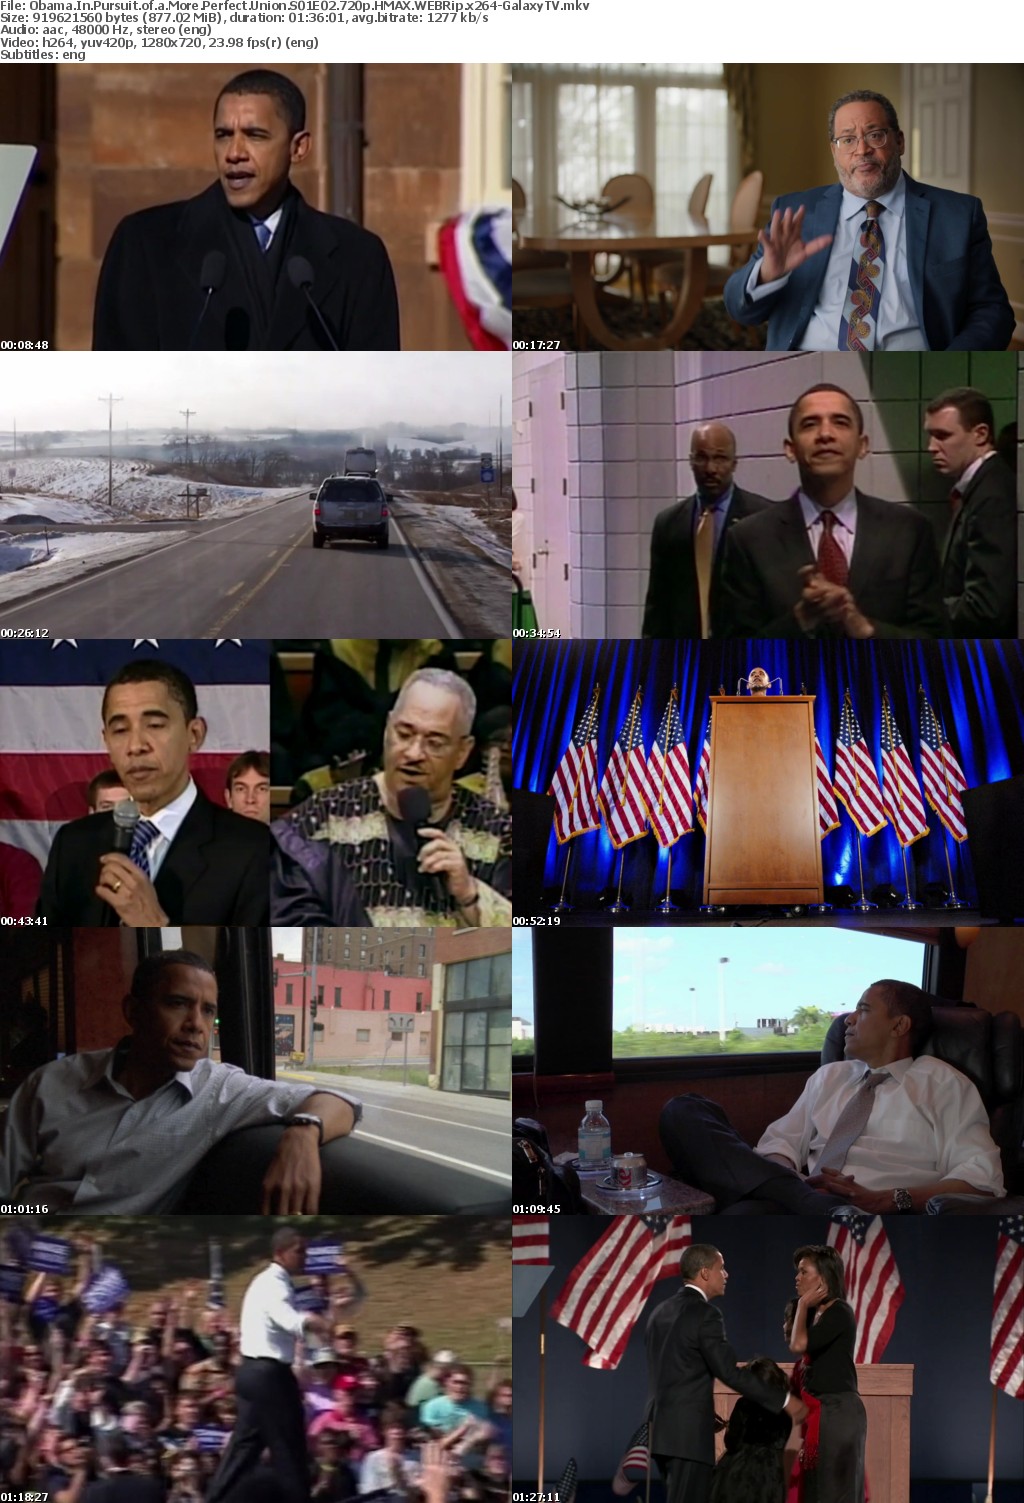 Obama In Pursuit of a More Perfect Union S01 COMPLETE 720p HMAX WEBRip x264-GalaxyTV